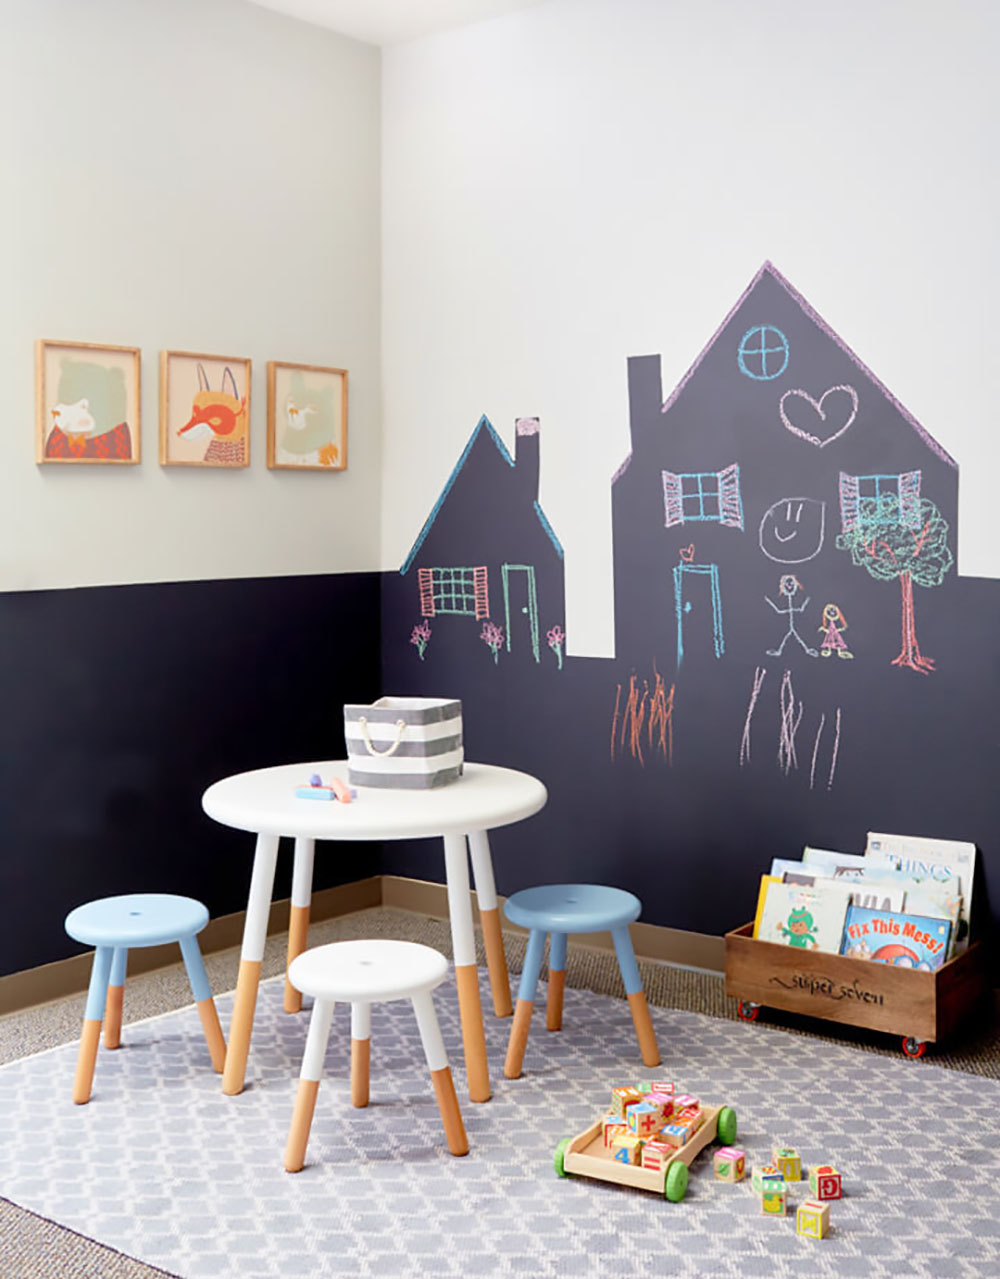 5 UNIQUE WAYS TO USE CHALKBOARD PAINT IN KIDS' SPACES! — WINTER